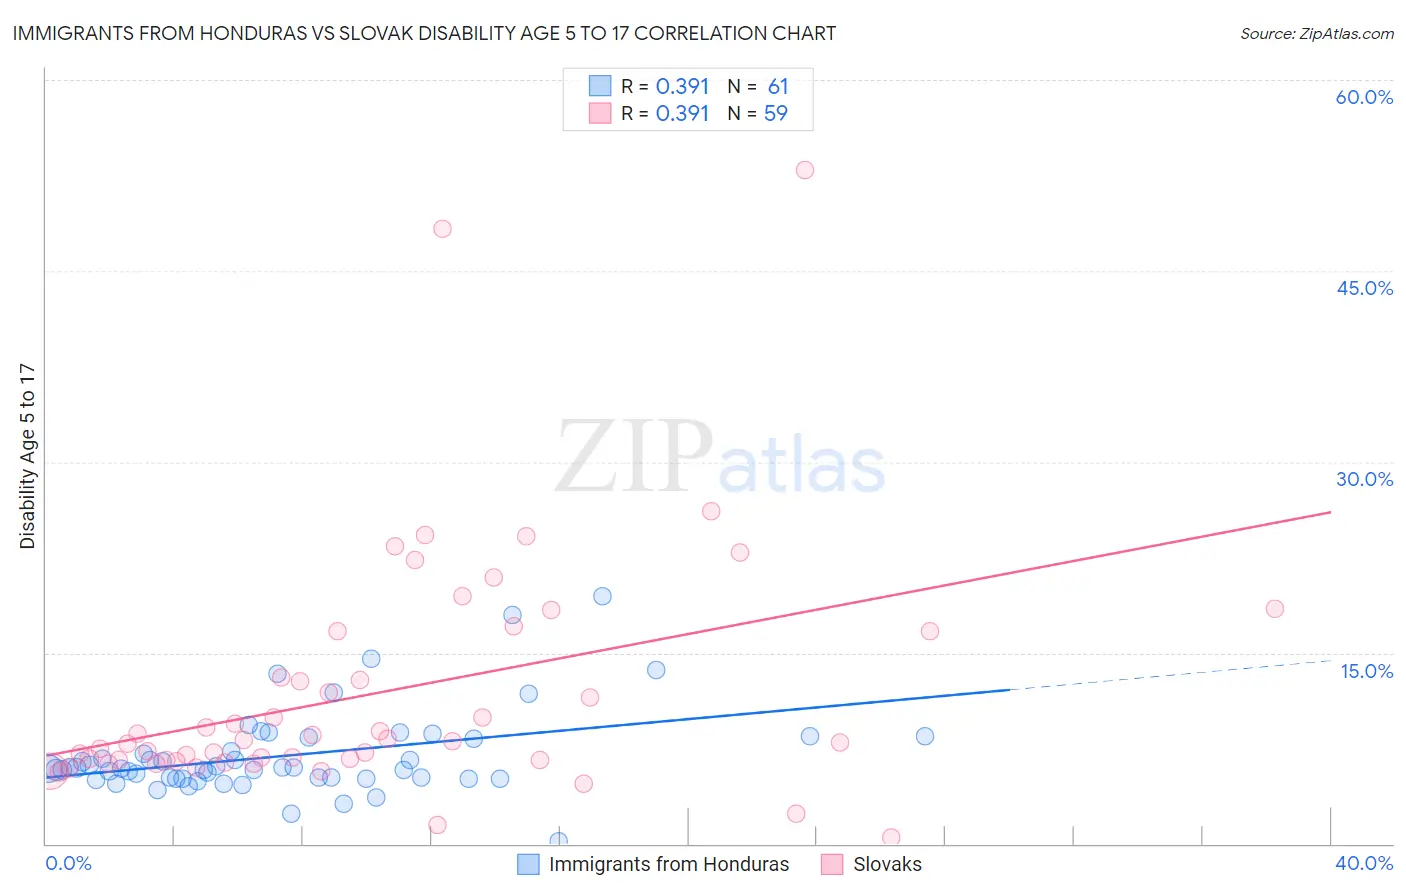 Immigrants from Honduras vs Slovak Disability Age 5 to 17